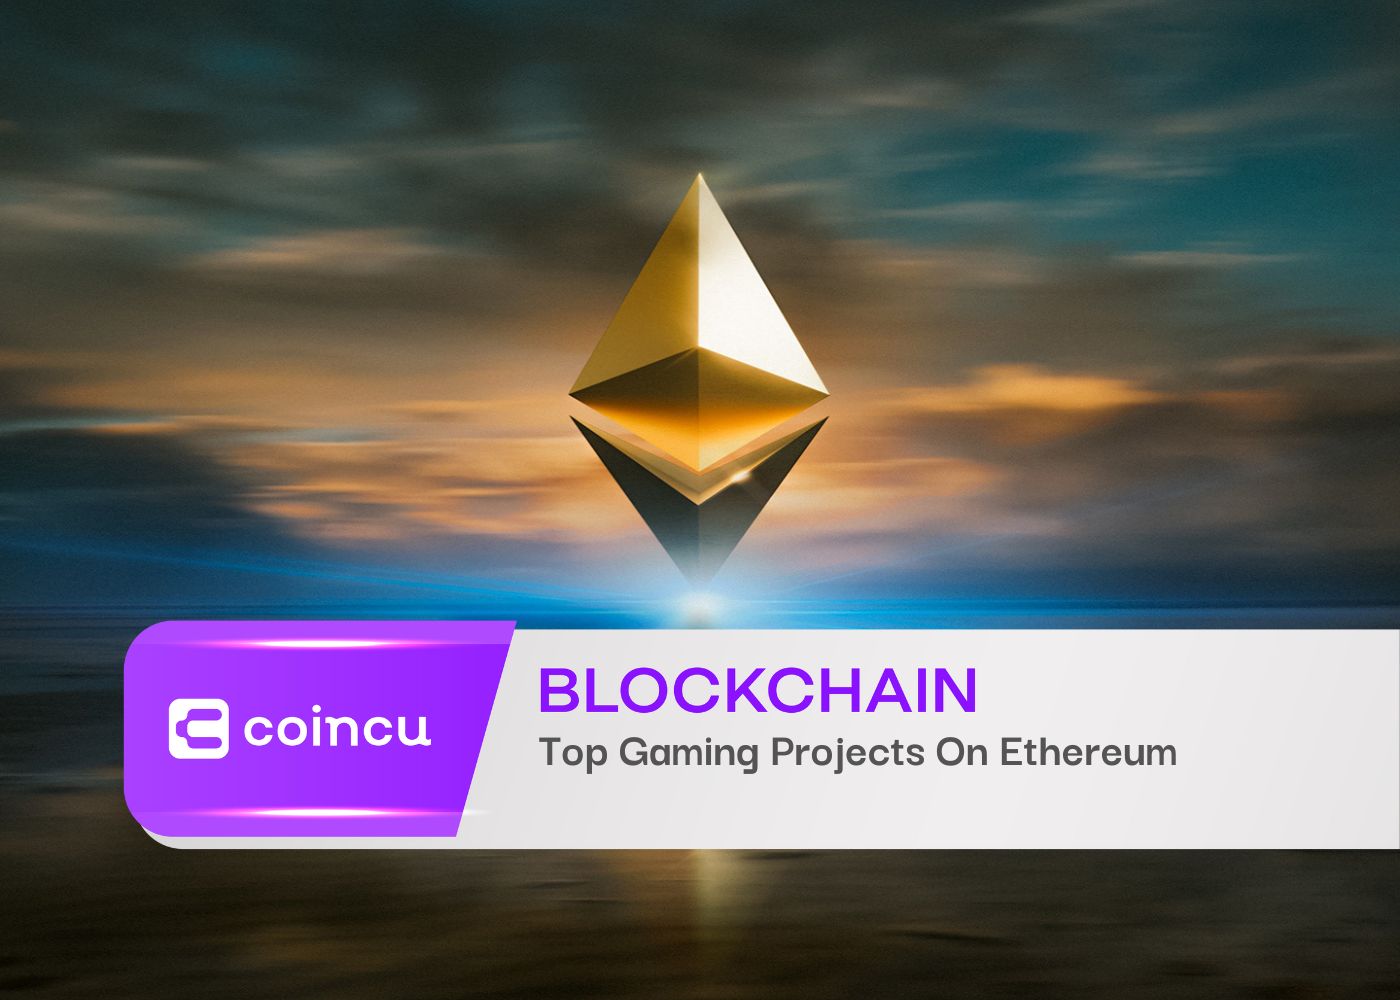 Top Gaming Projects On Ethereum